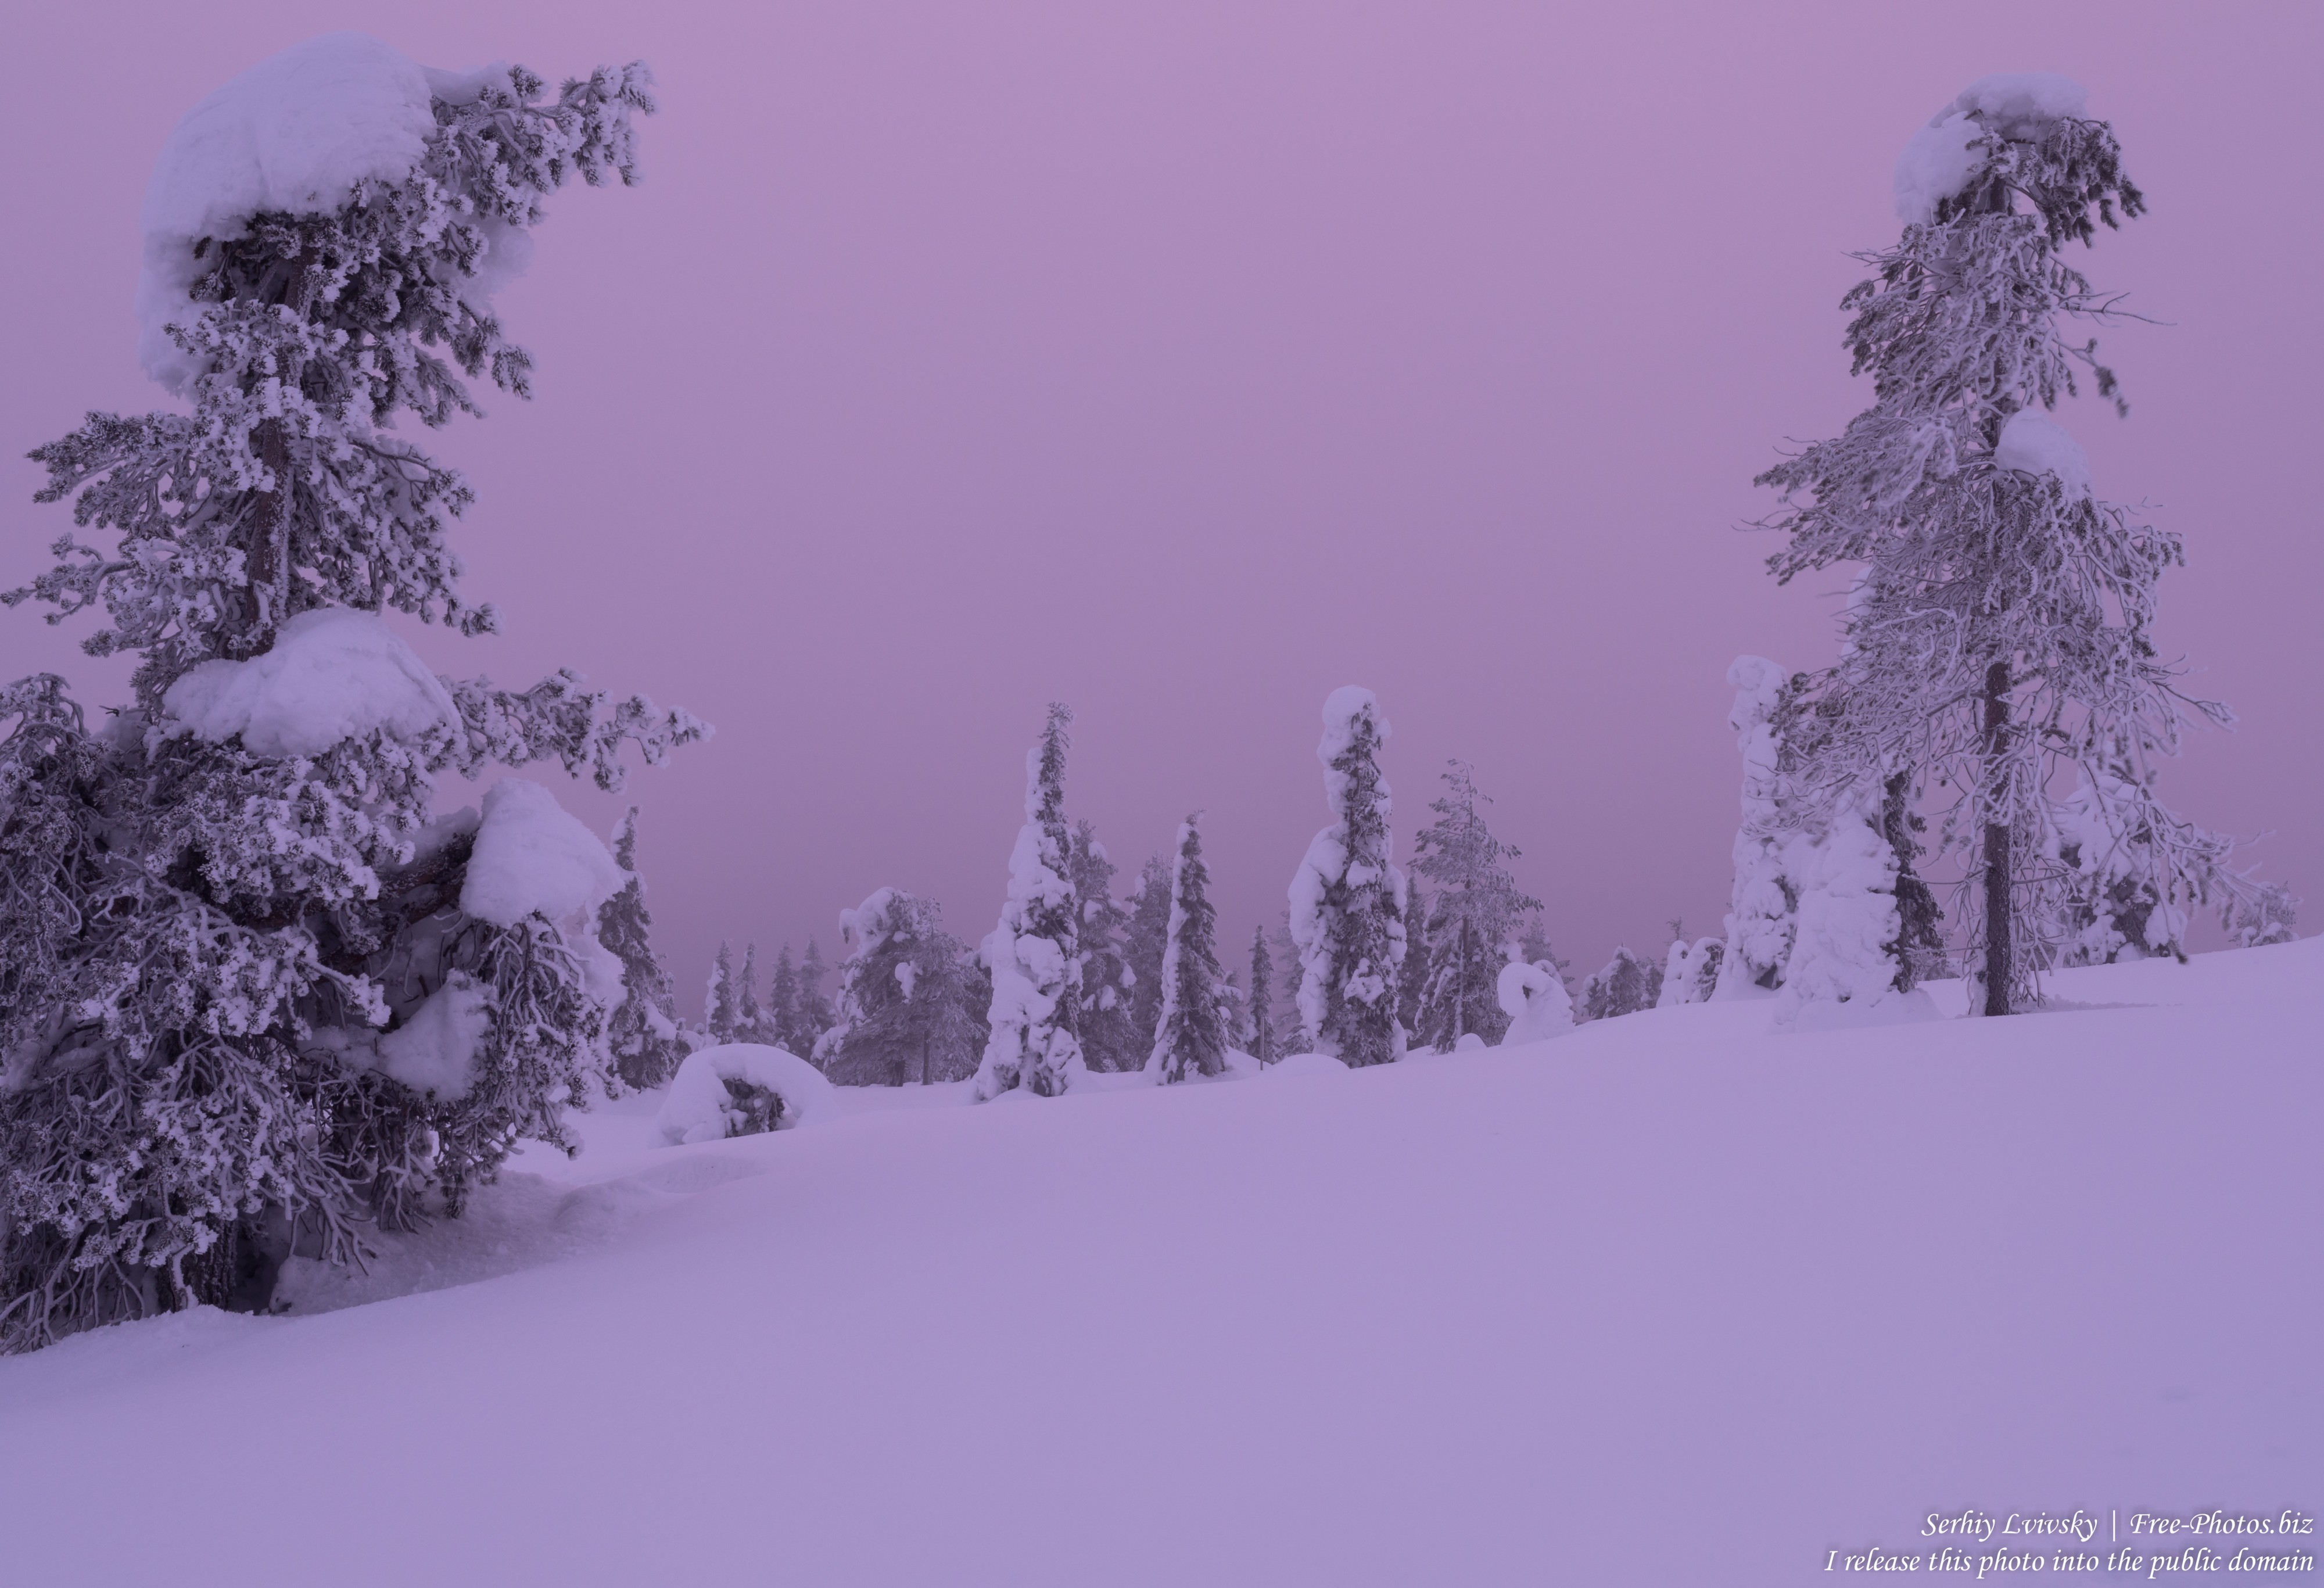 Riisitunturi, Finland, photographed in January 2020 by Serhiy Lvivsky, picture 4